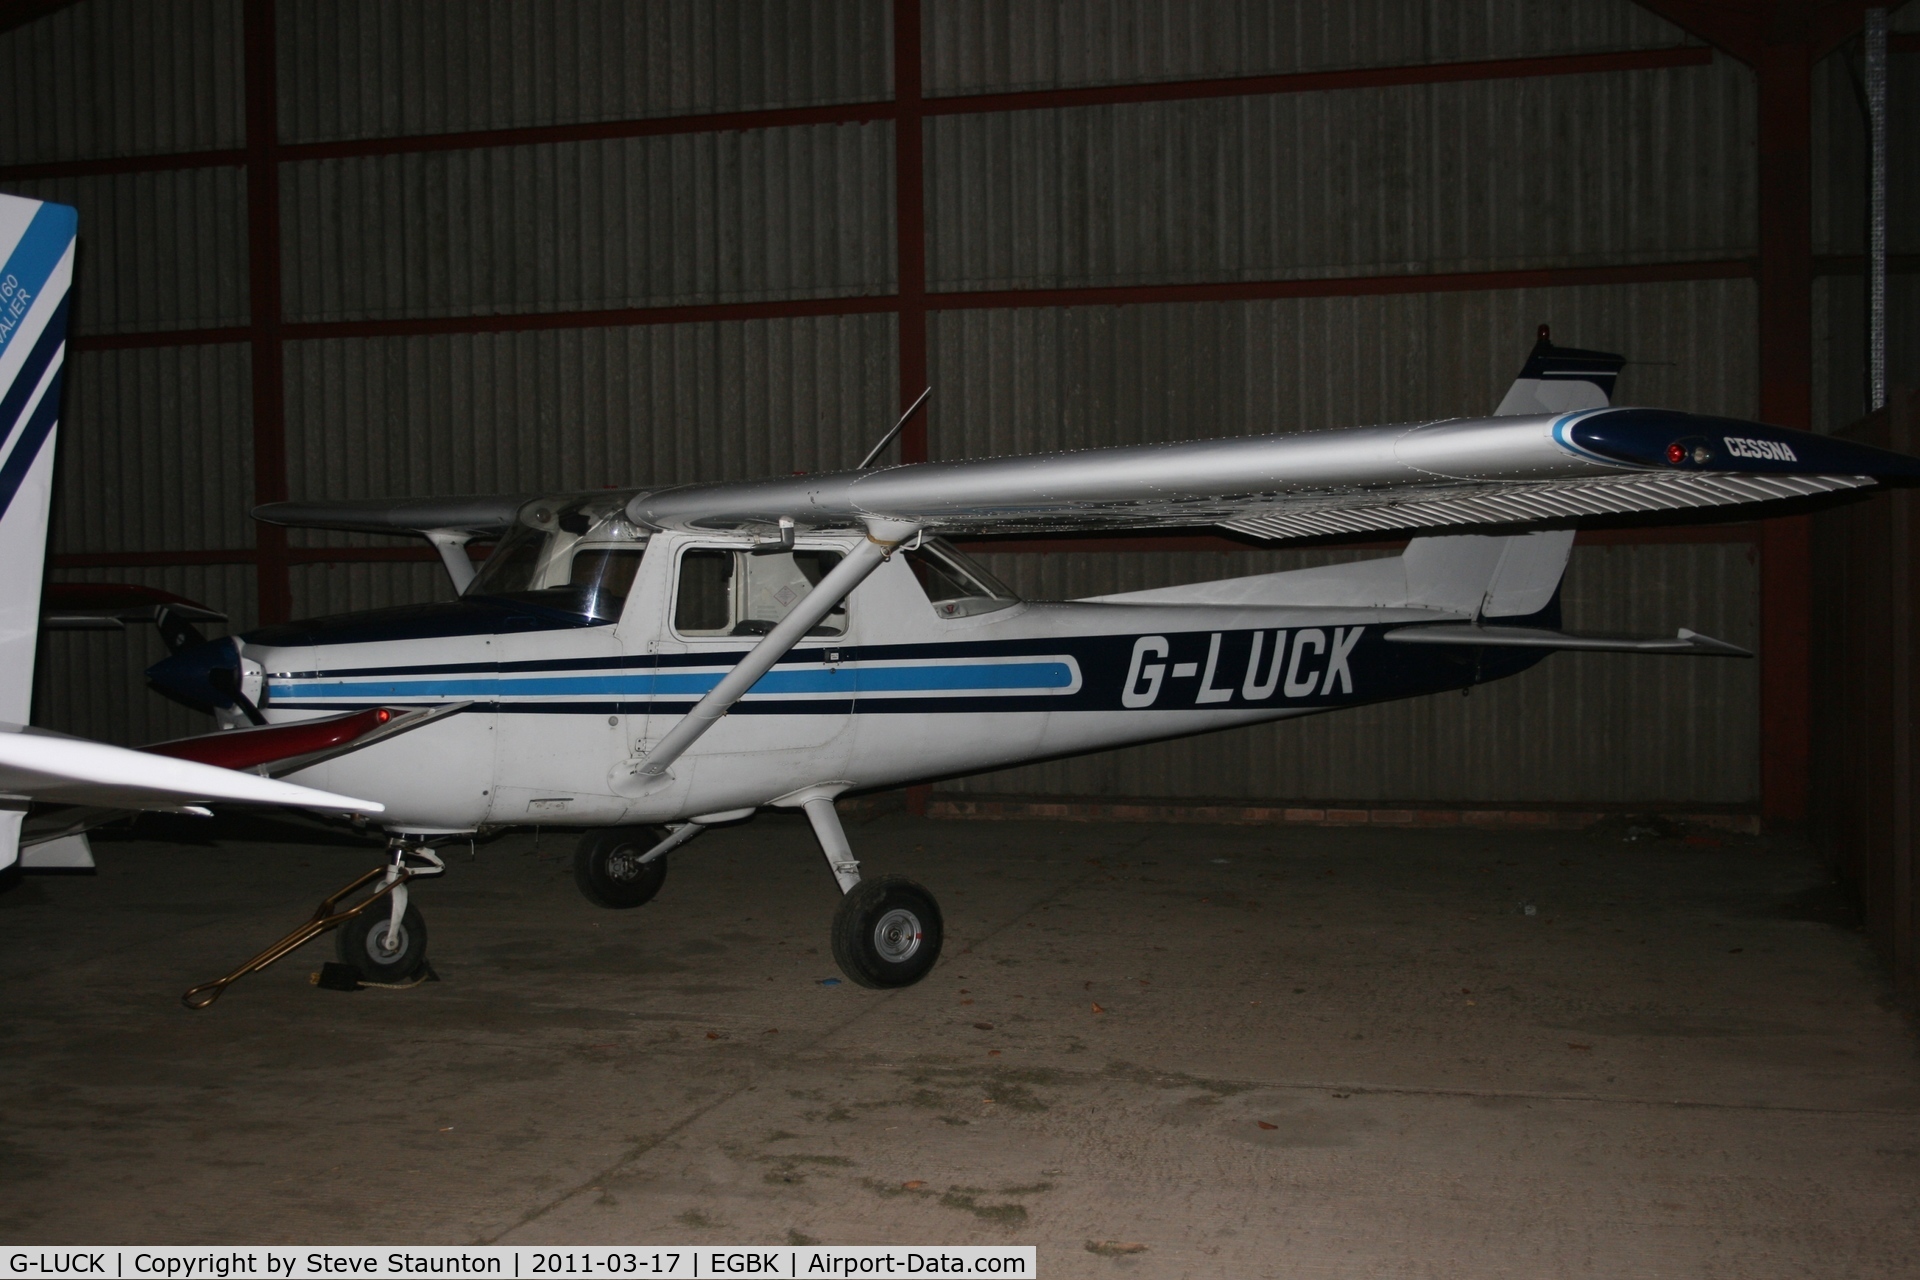 G-LUCK, 1975 Reims F150M C/N 1238, Taken at Sywell Airfield March 2011